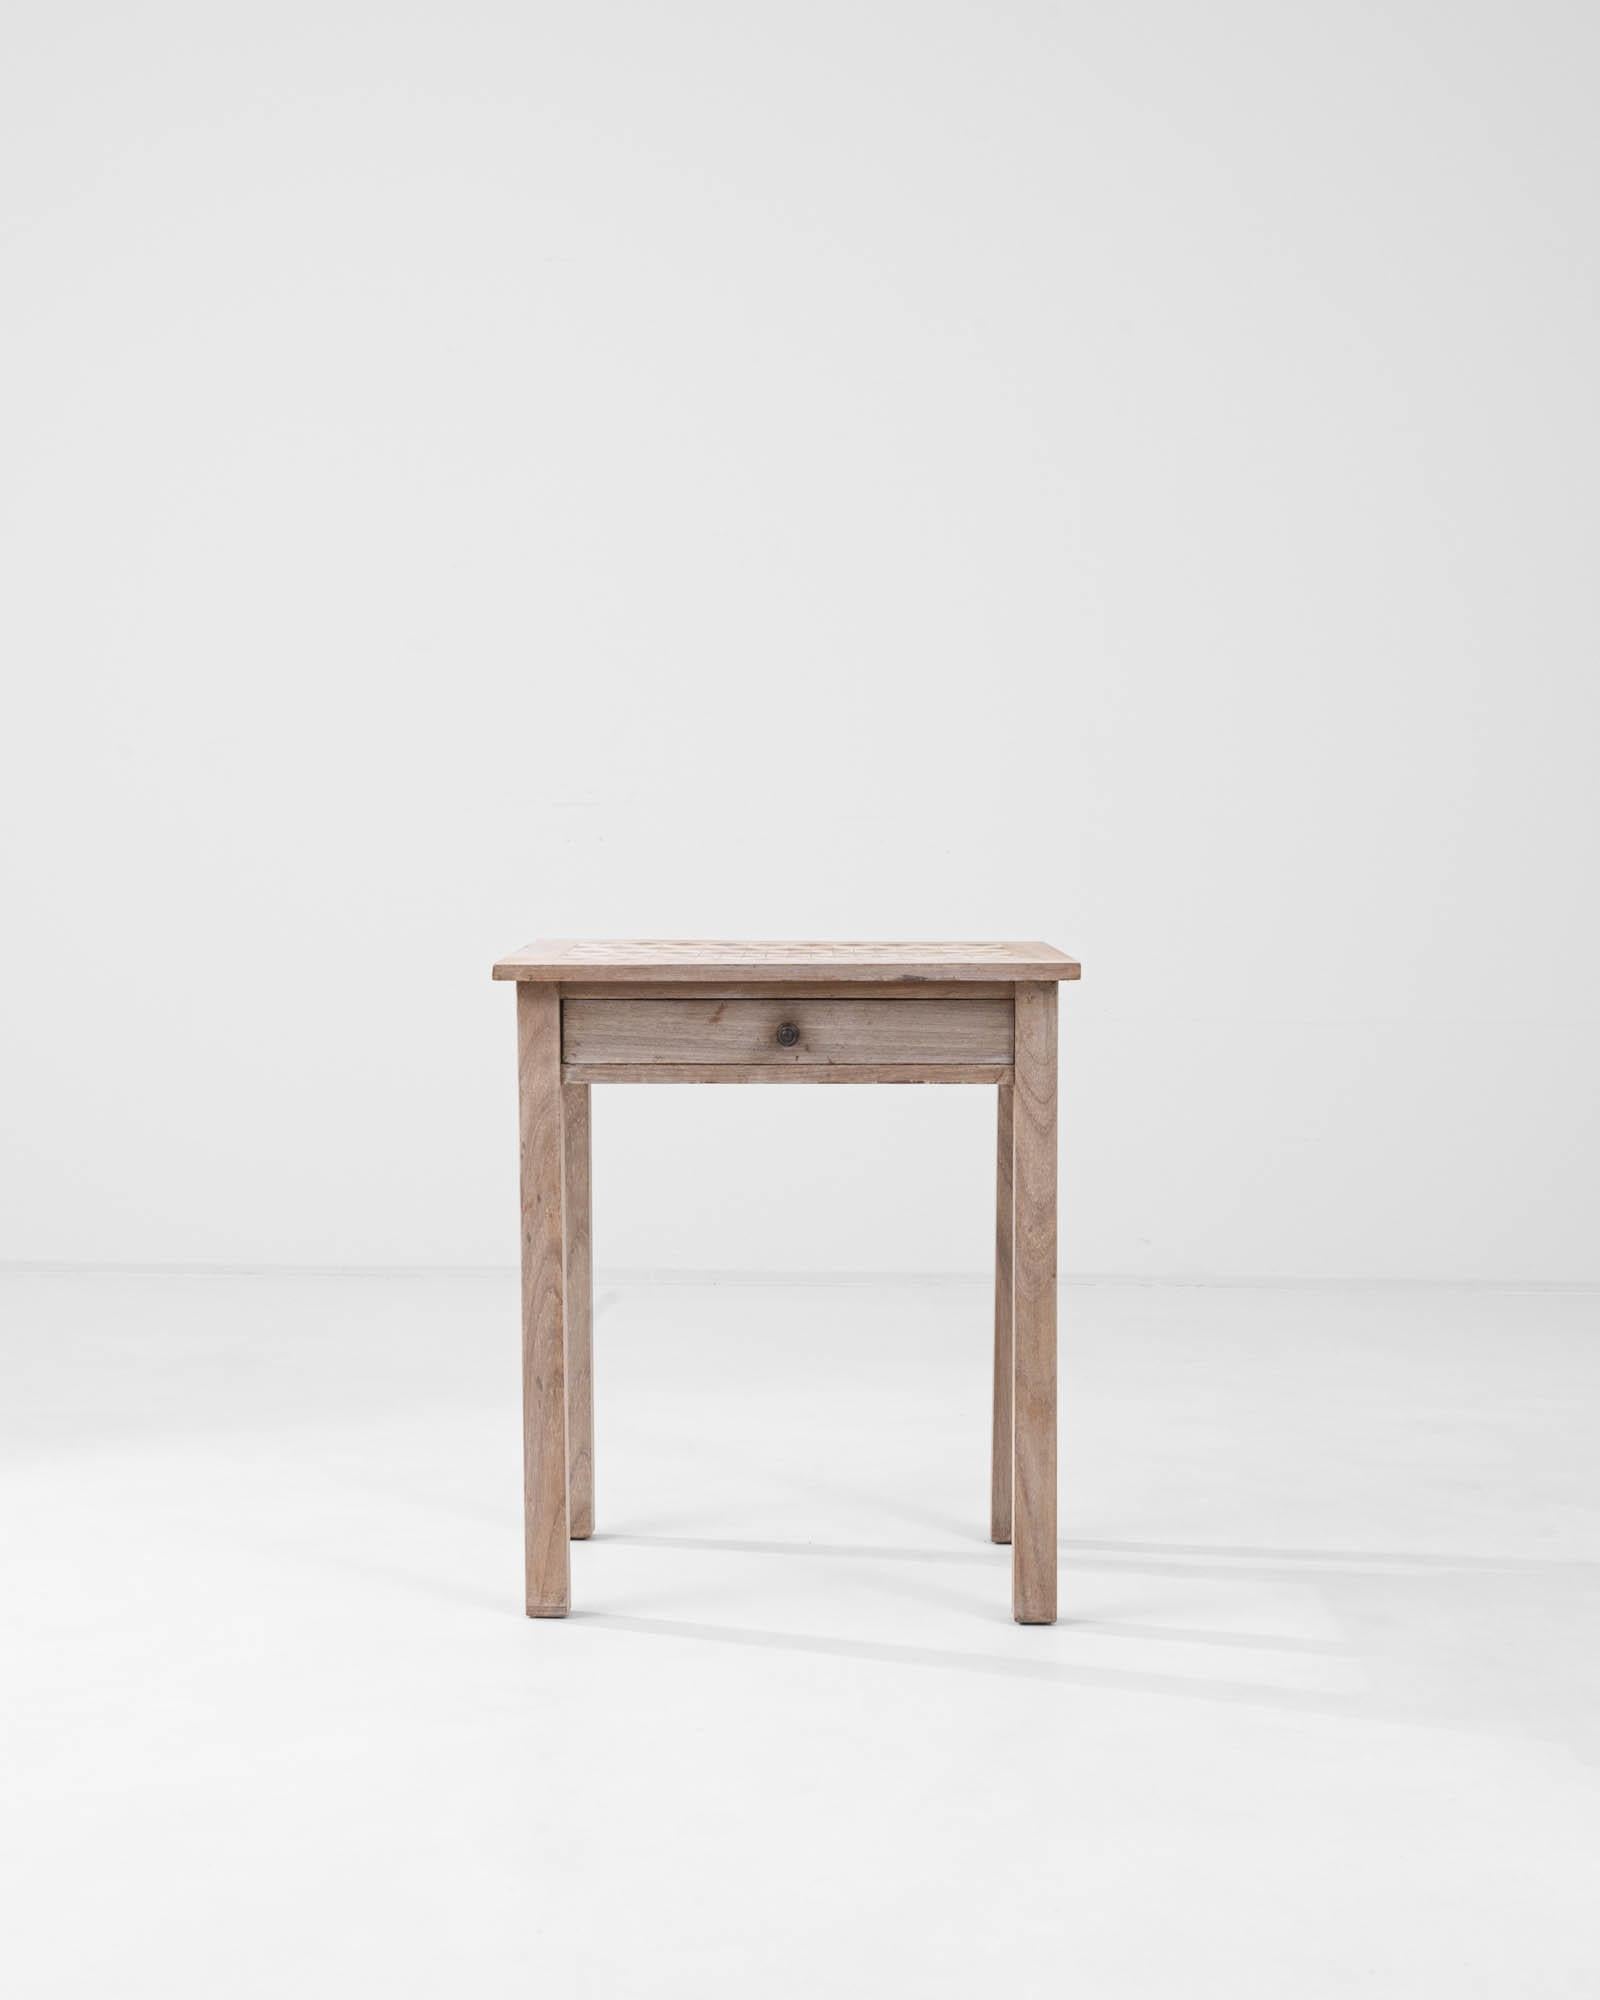 A clean composition and a beautifully crafted tabletop give this vintage oak side table a unique character. Hand-made in France in the early 20th century, the silhouette is simple and linear. The neat corners of the square tabletop mirror the neat